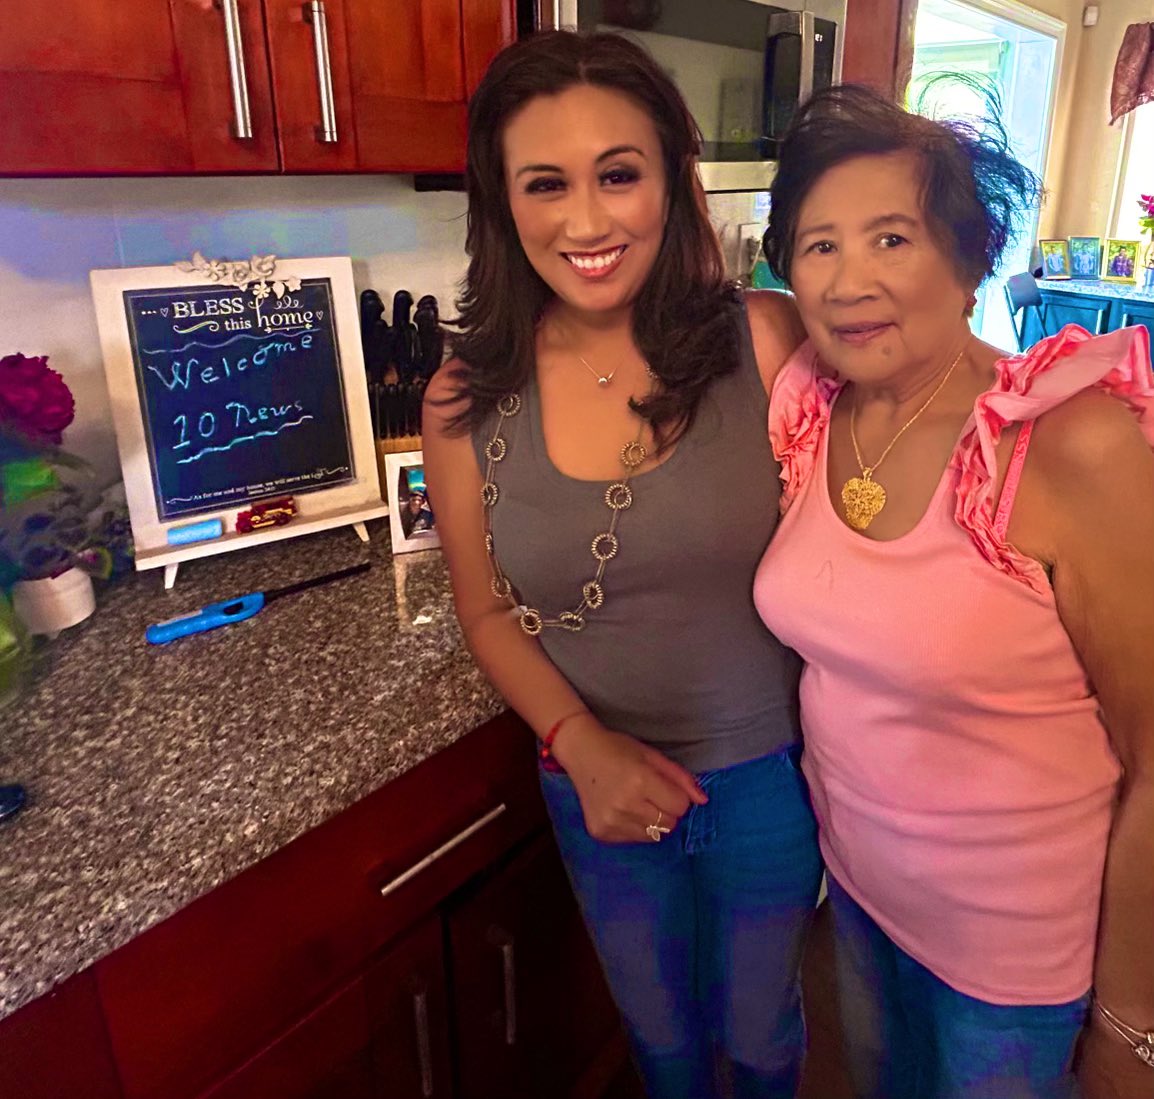 Had fun welcoming @10news into our home, shooting an #AAPI promo sharing our favorite home cooked Filipino food.